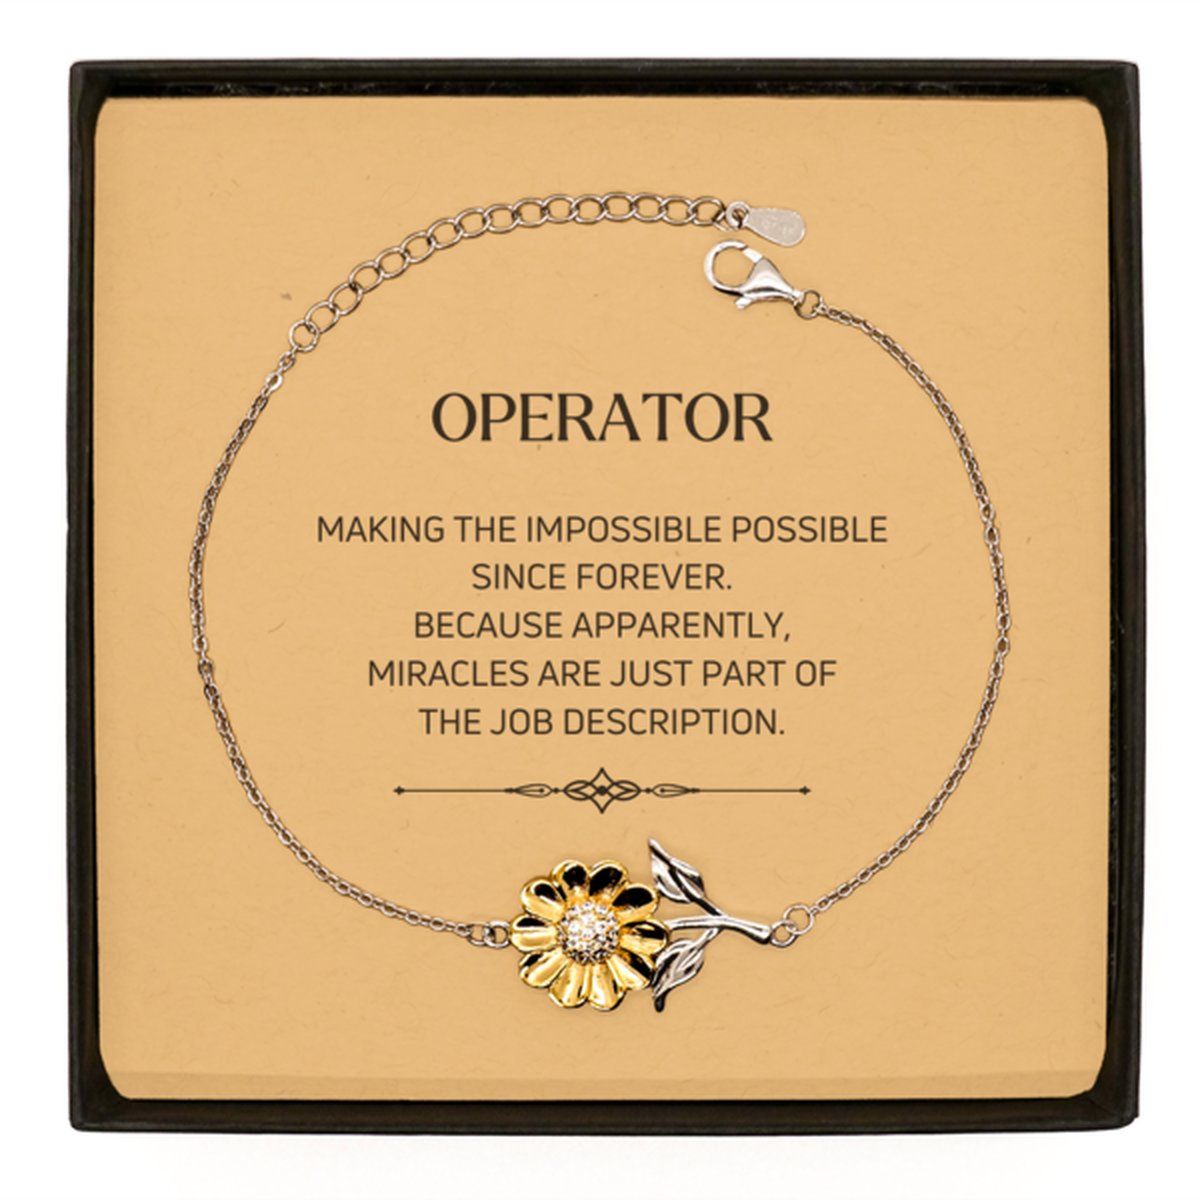 Funny Operator Gifts, Miracles are just part of the job description, Inspirational Birthday Sunflower Bracelet For Operator, Men, Women, Coworkers, Friends, Boss